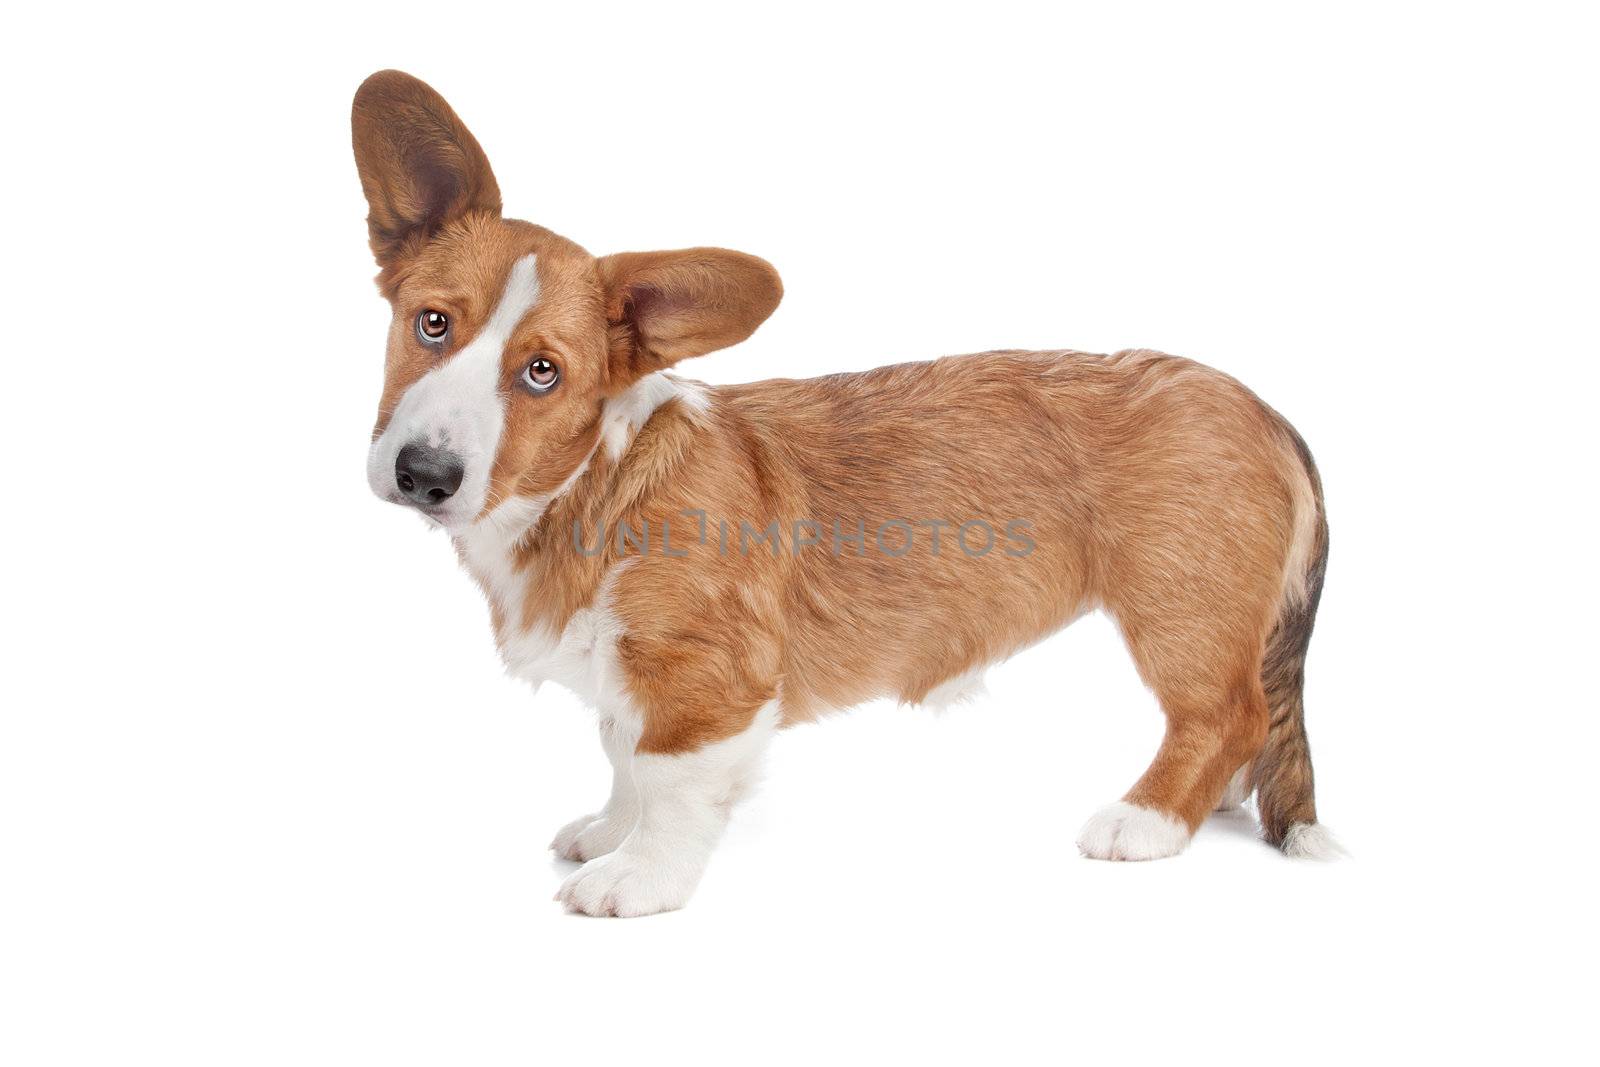 Welsh Corgi dog standing and looking at camera, isolated on a white background